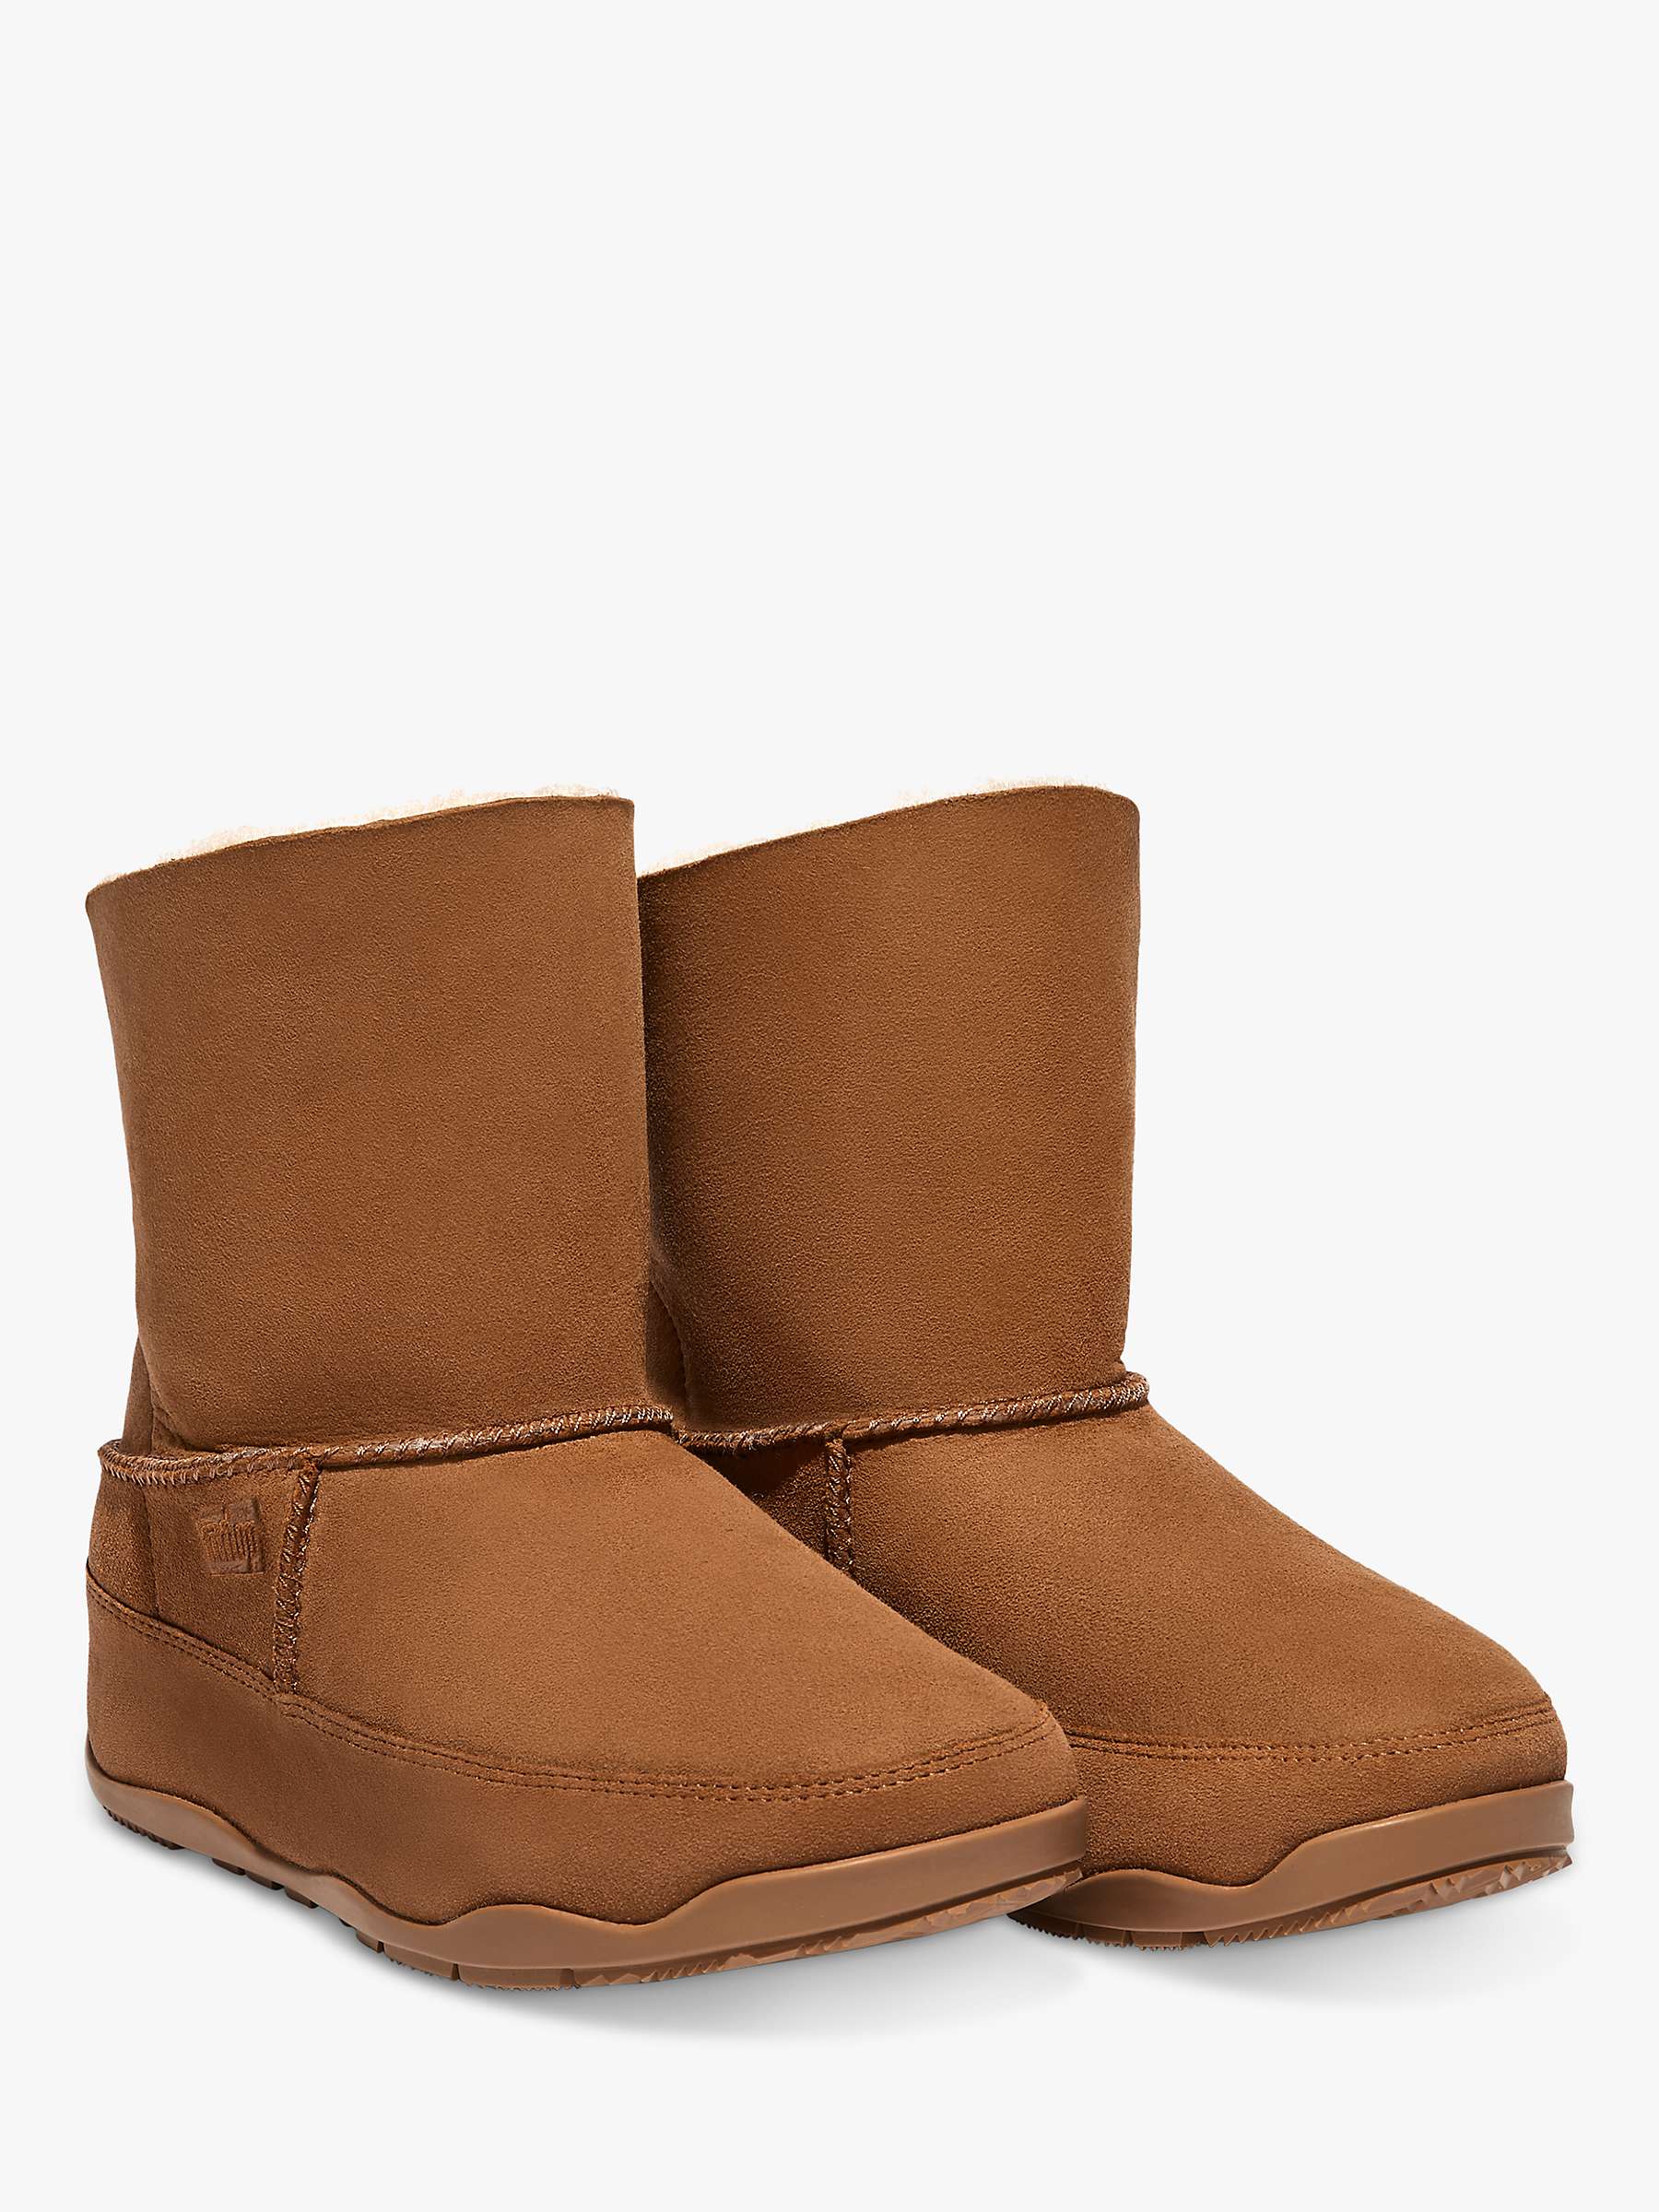 Buy FitFlop Mukluk Suede Ankle Boots Online at johnlewis.com